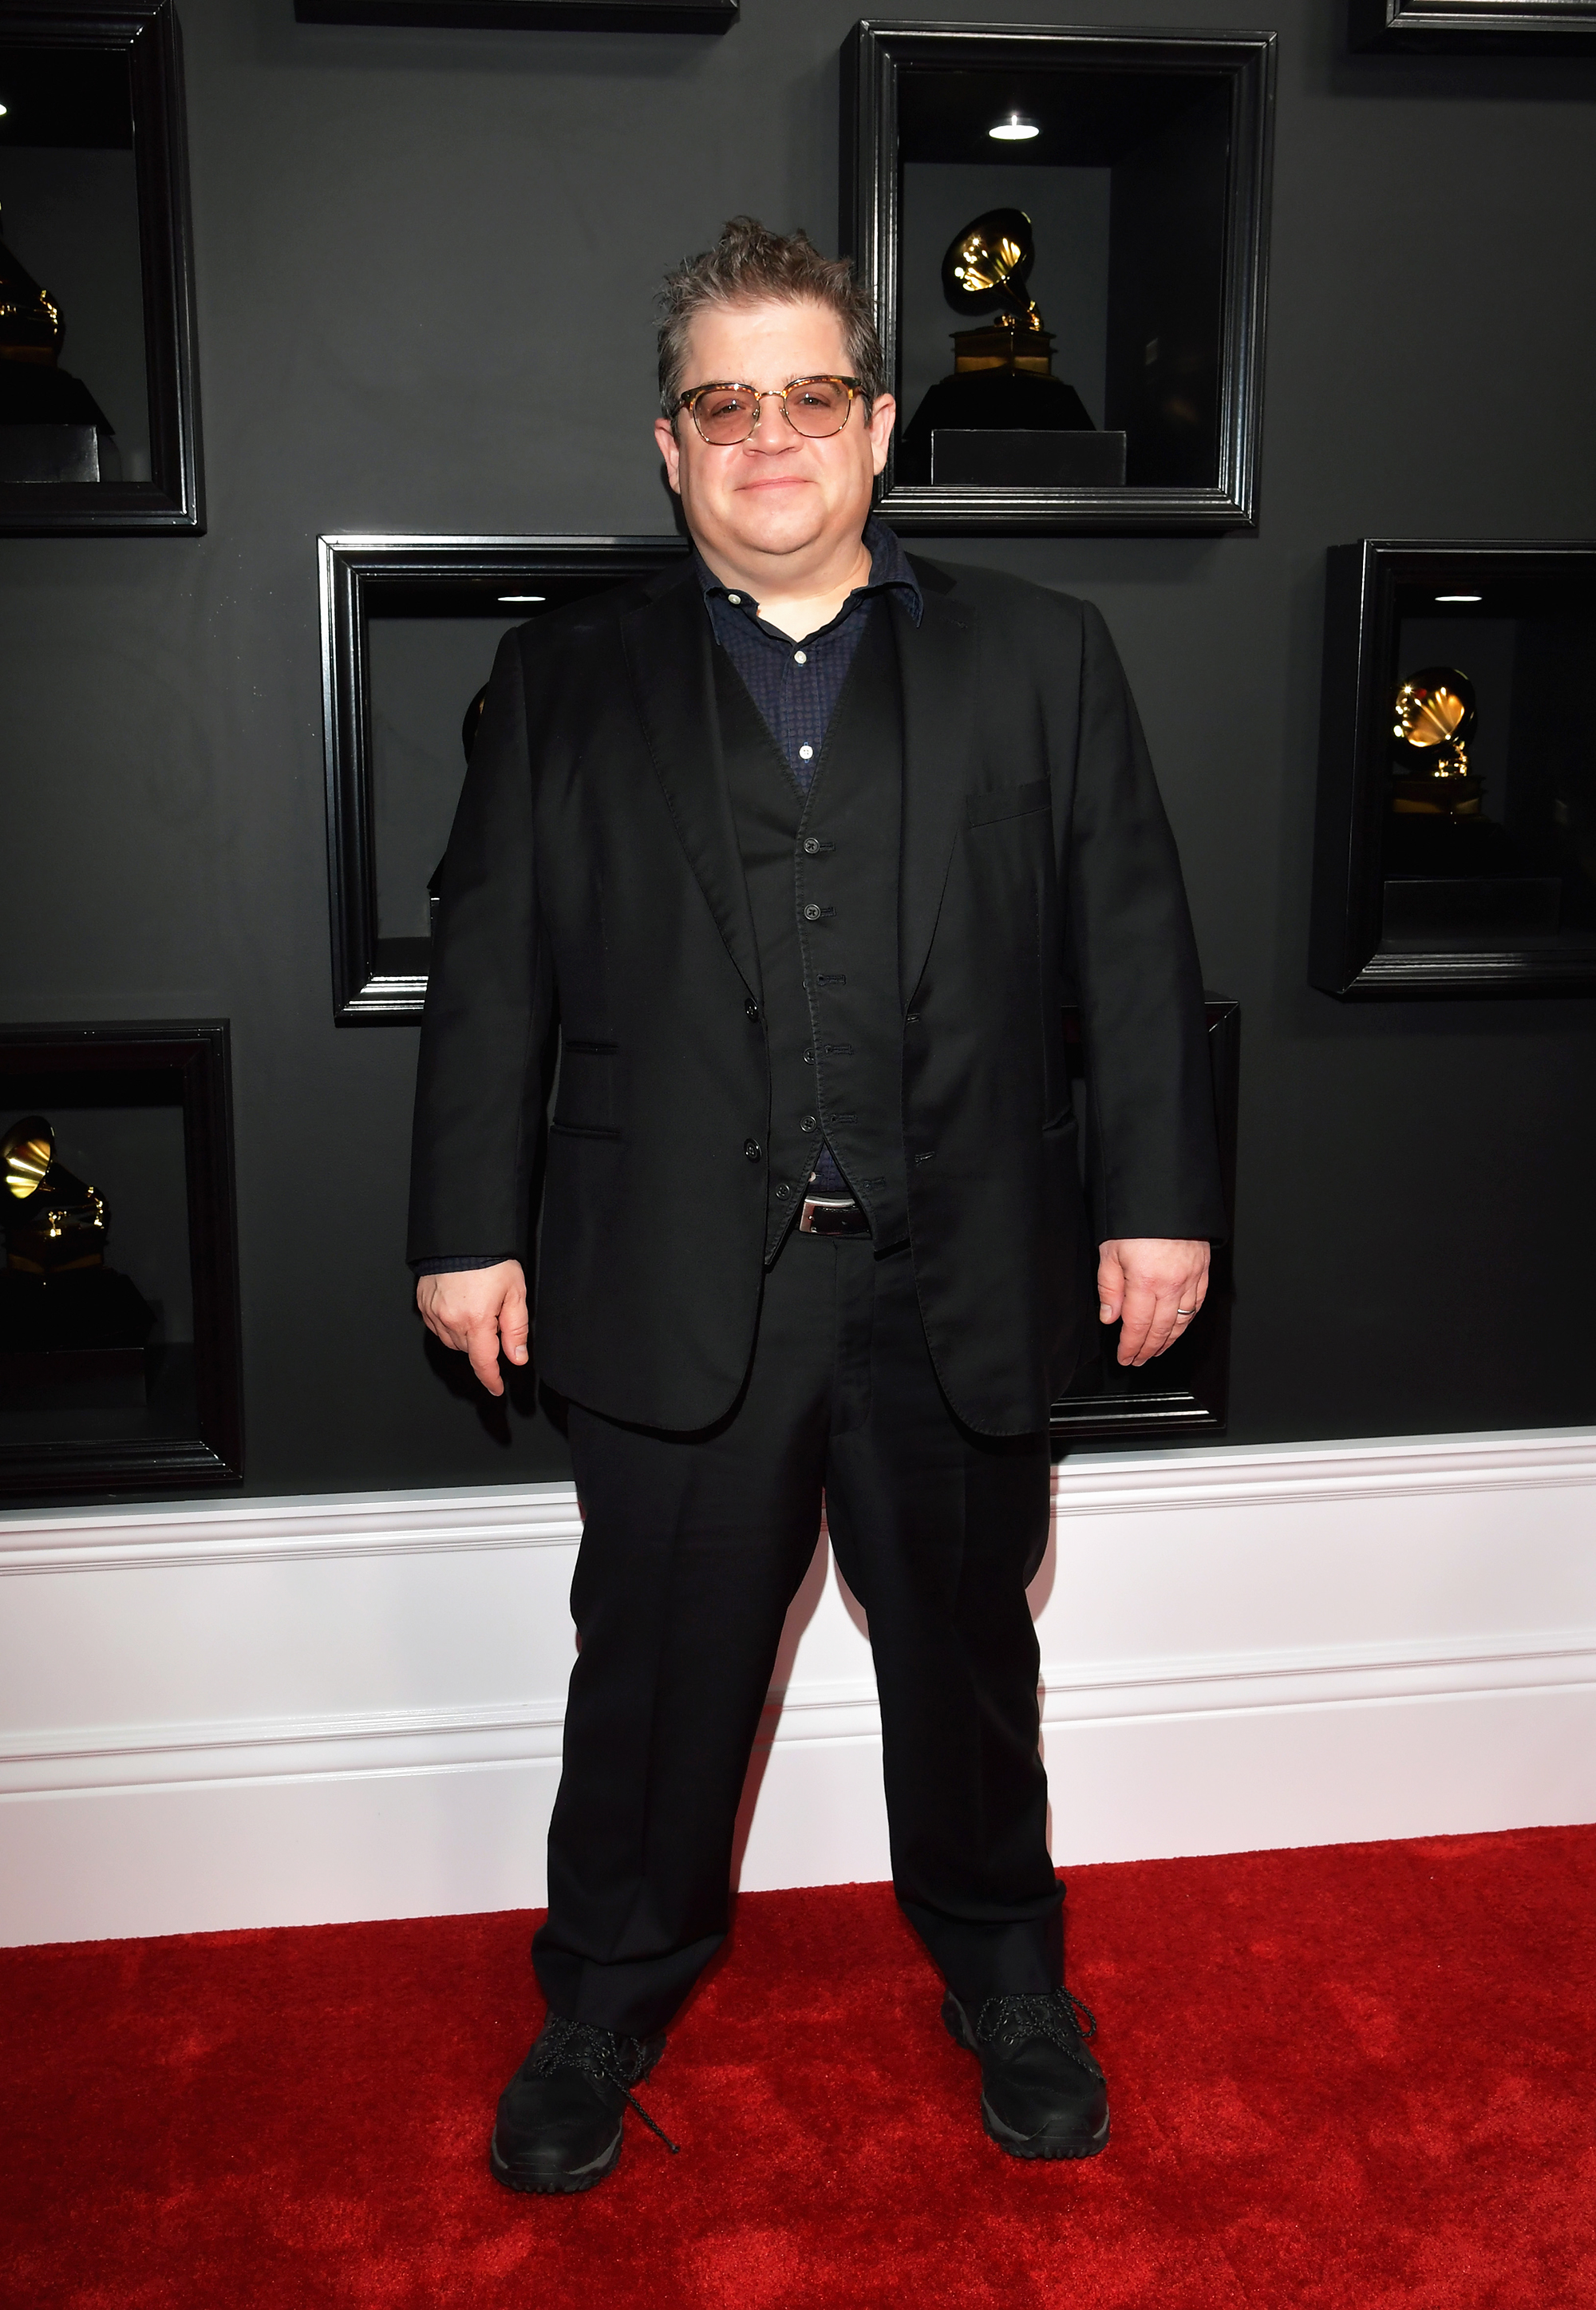 Patton Oswalt attends The 59th GRAMMY Awards at STAPLES Center, on Feb. 12, 2017 in Los Angeles.